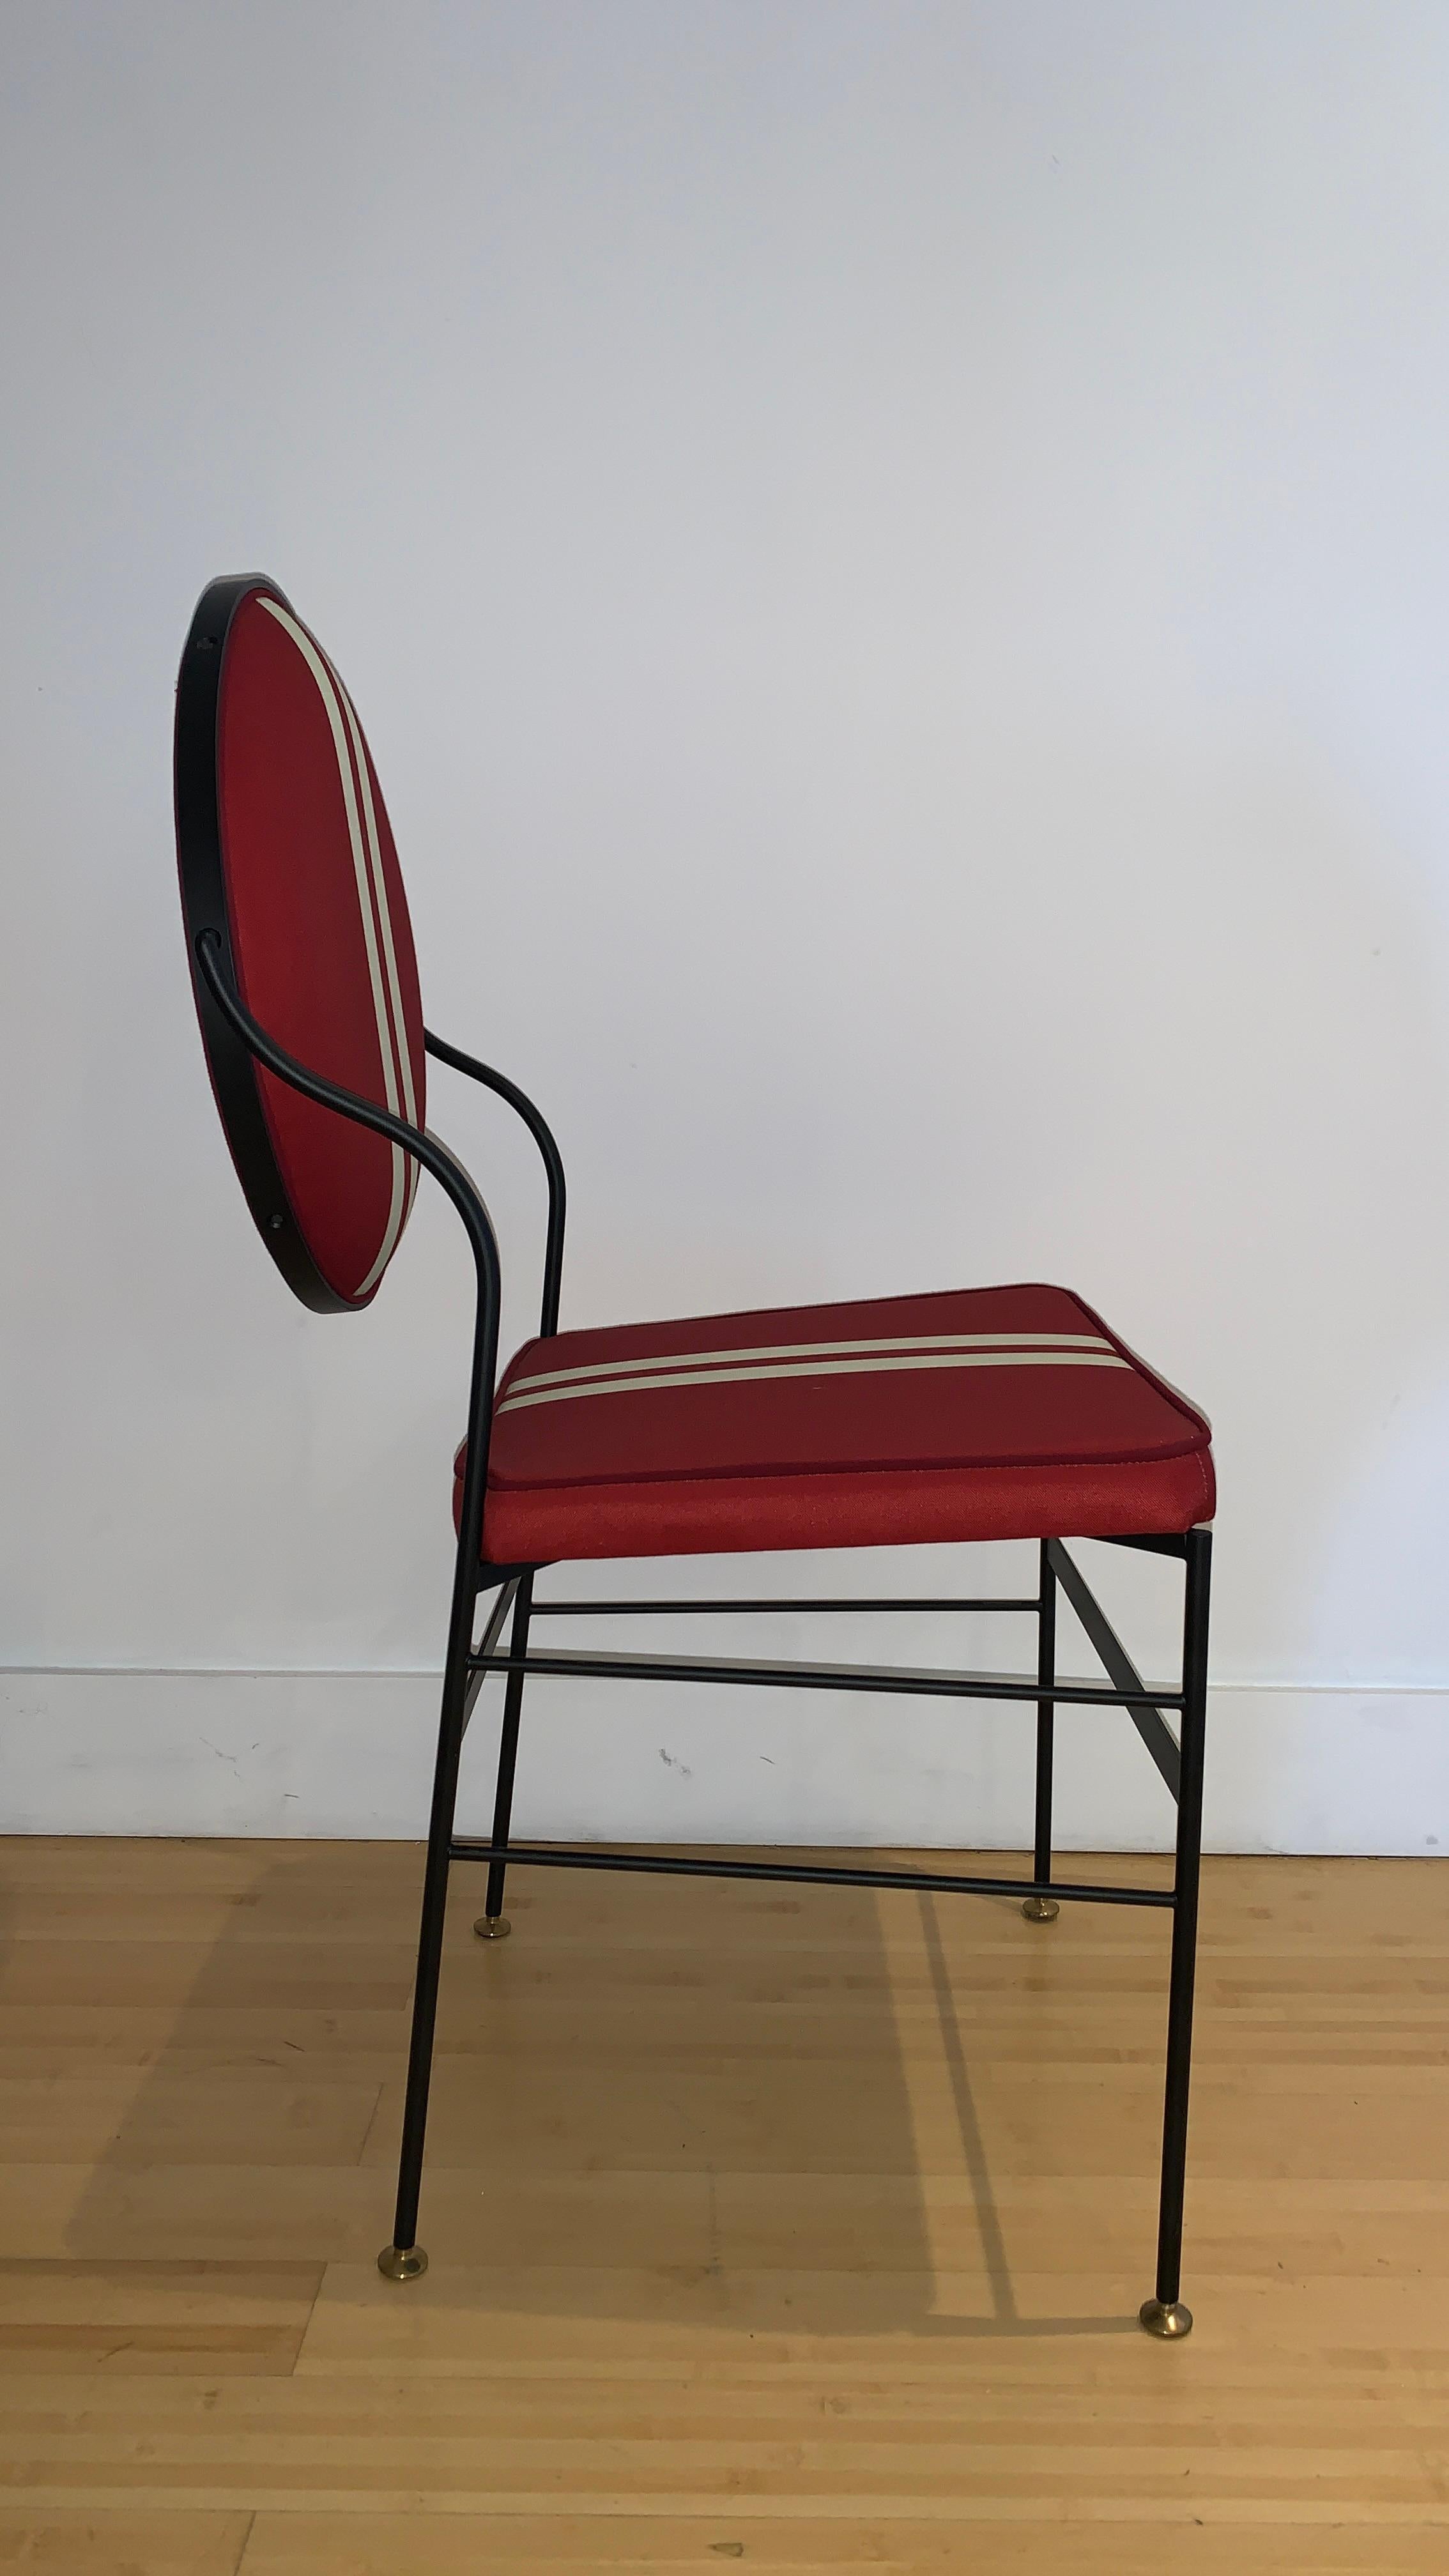 Contemporary In Stock in Los Angeles, Luigina Red/White Sport Stripe Chair